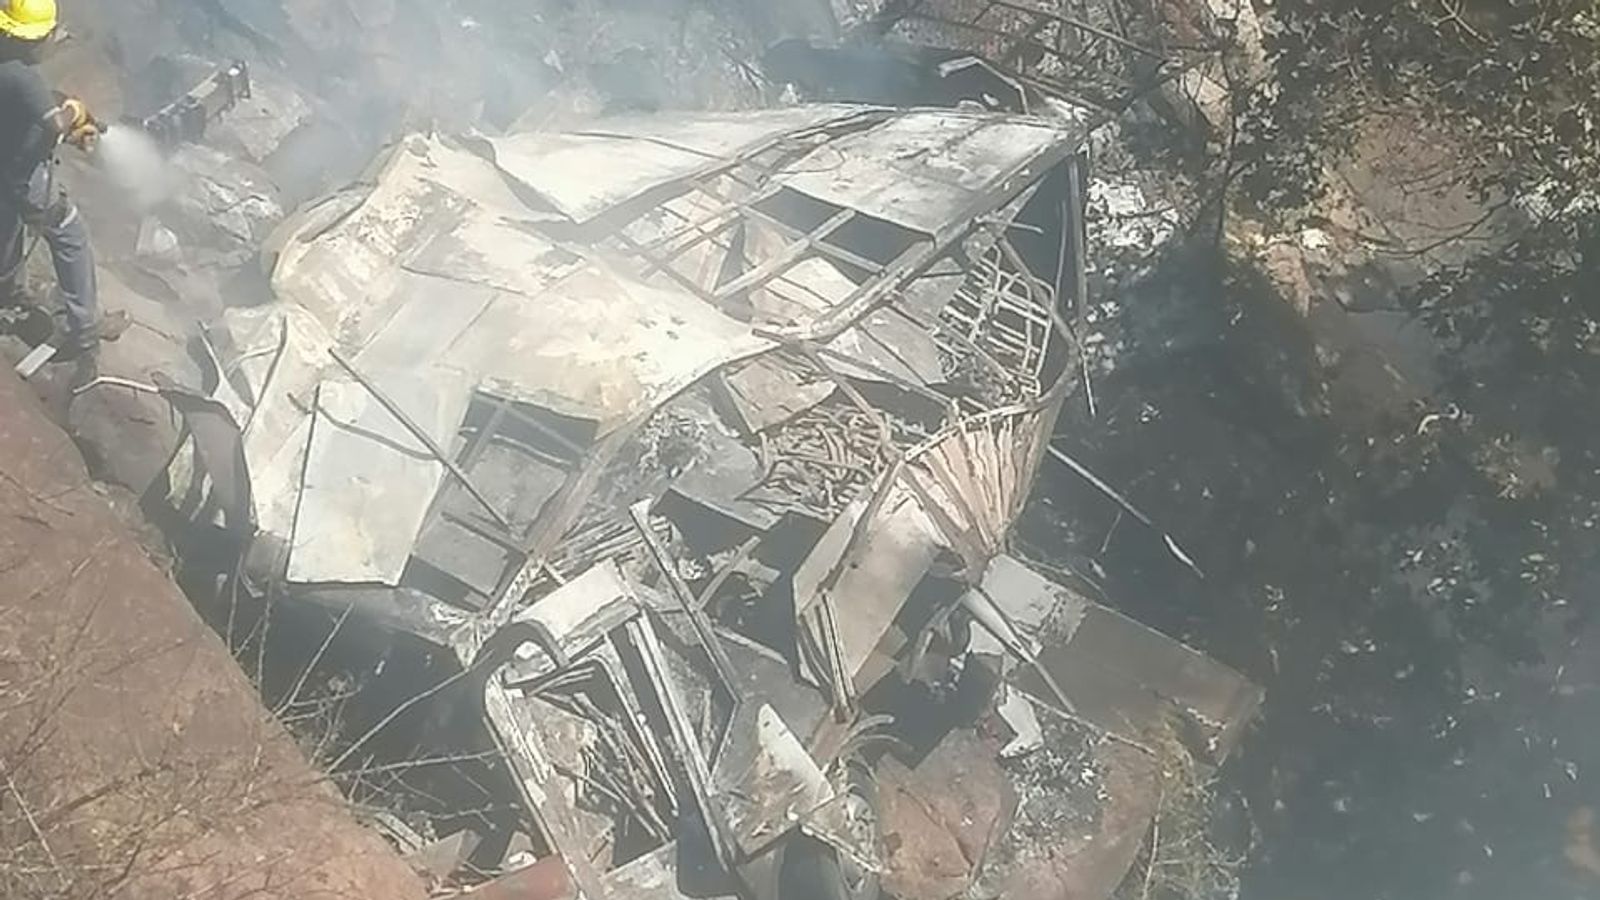 45 people killed in bus crash in South Africa – gi